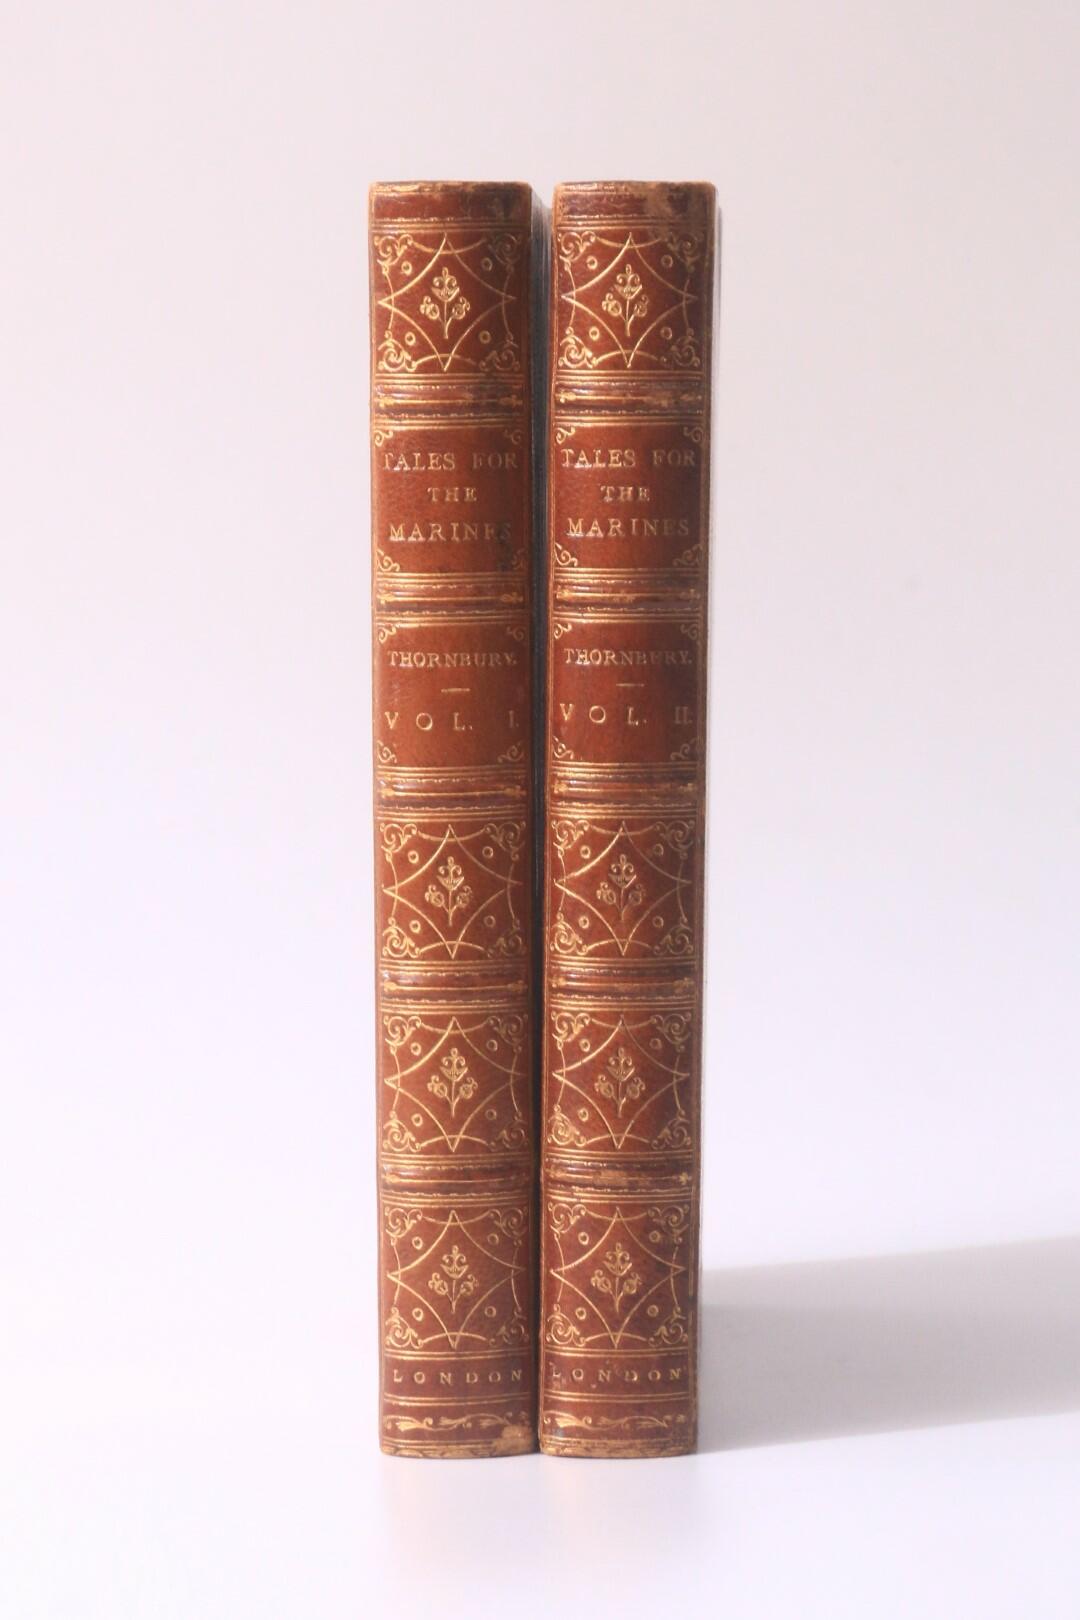 [George] Walter Thornbury - Tales for the Marines - Sampson Low, Son and Marston, nd [1865], First Edition.